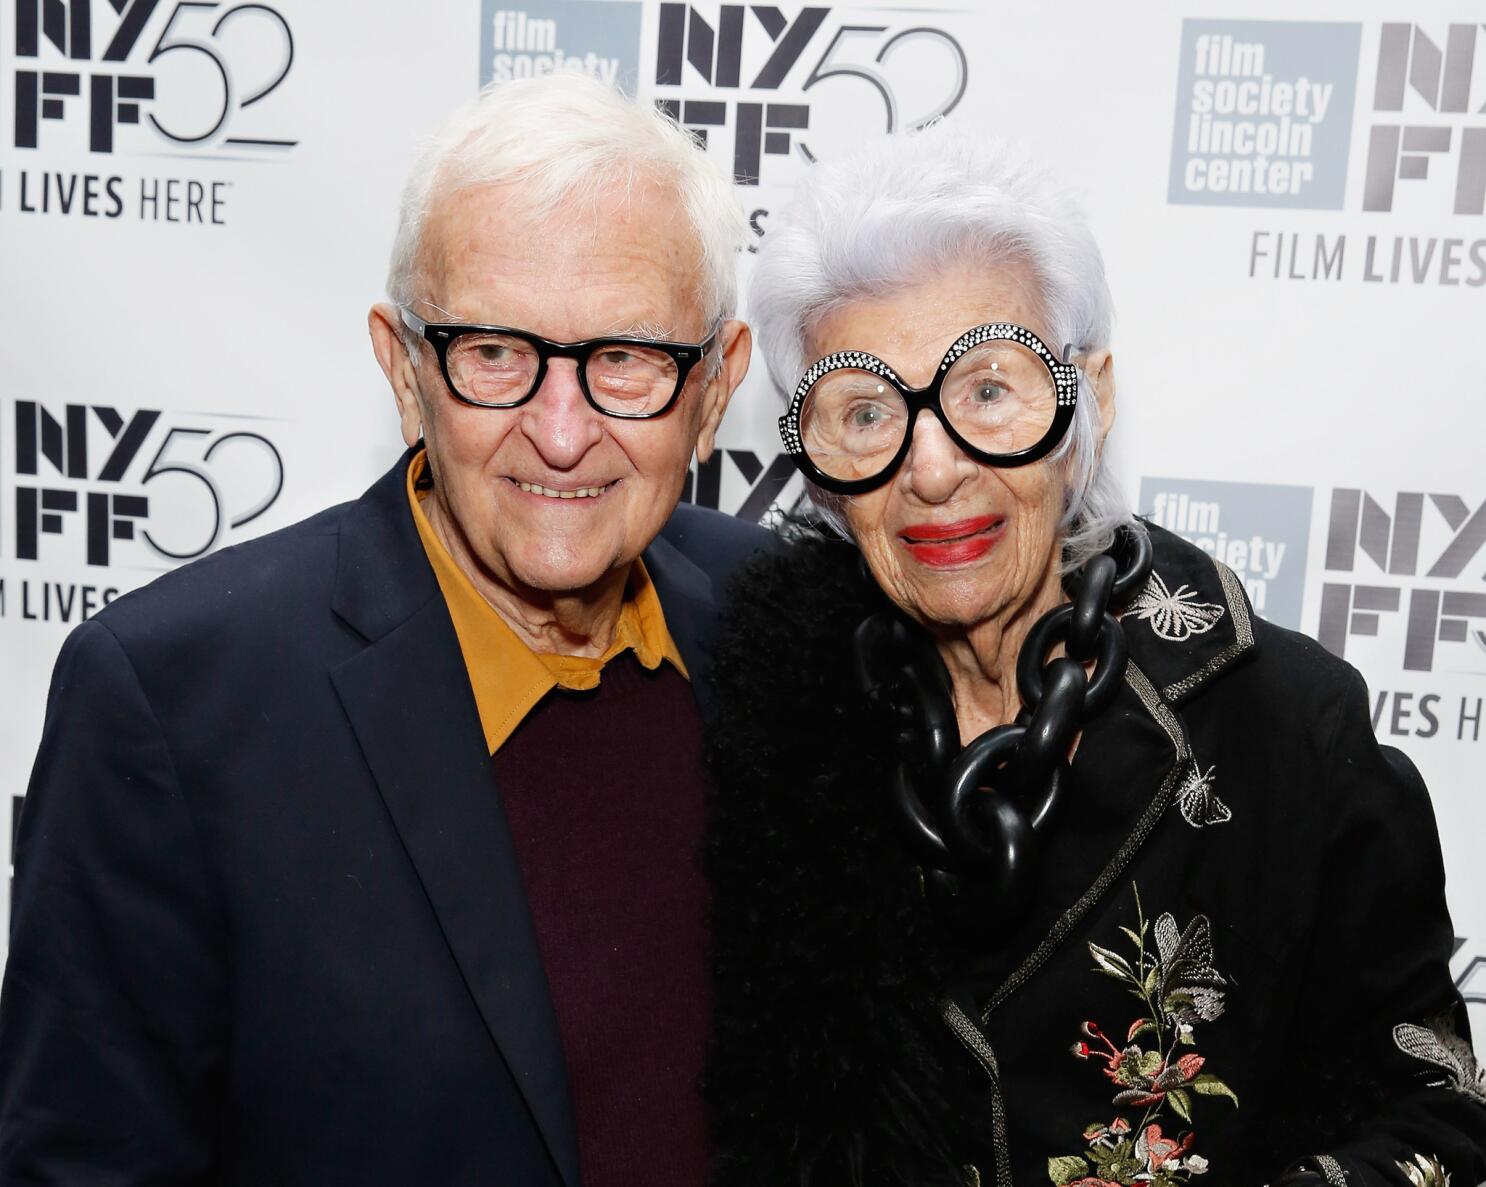 With a new film, Albert Maysles maintains his empathy, and